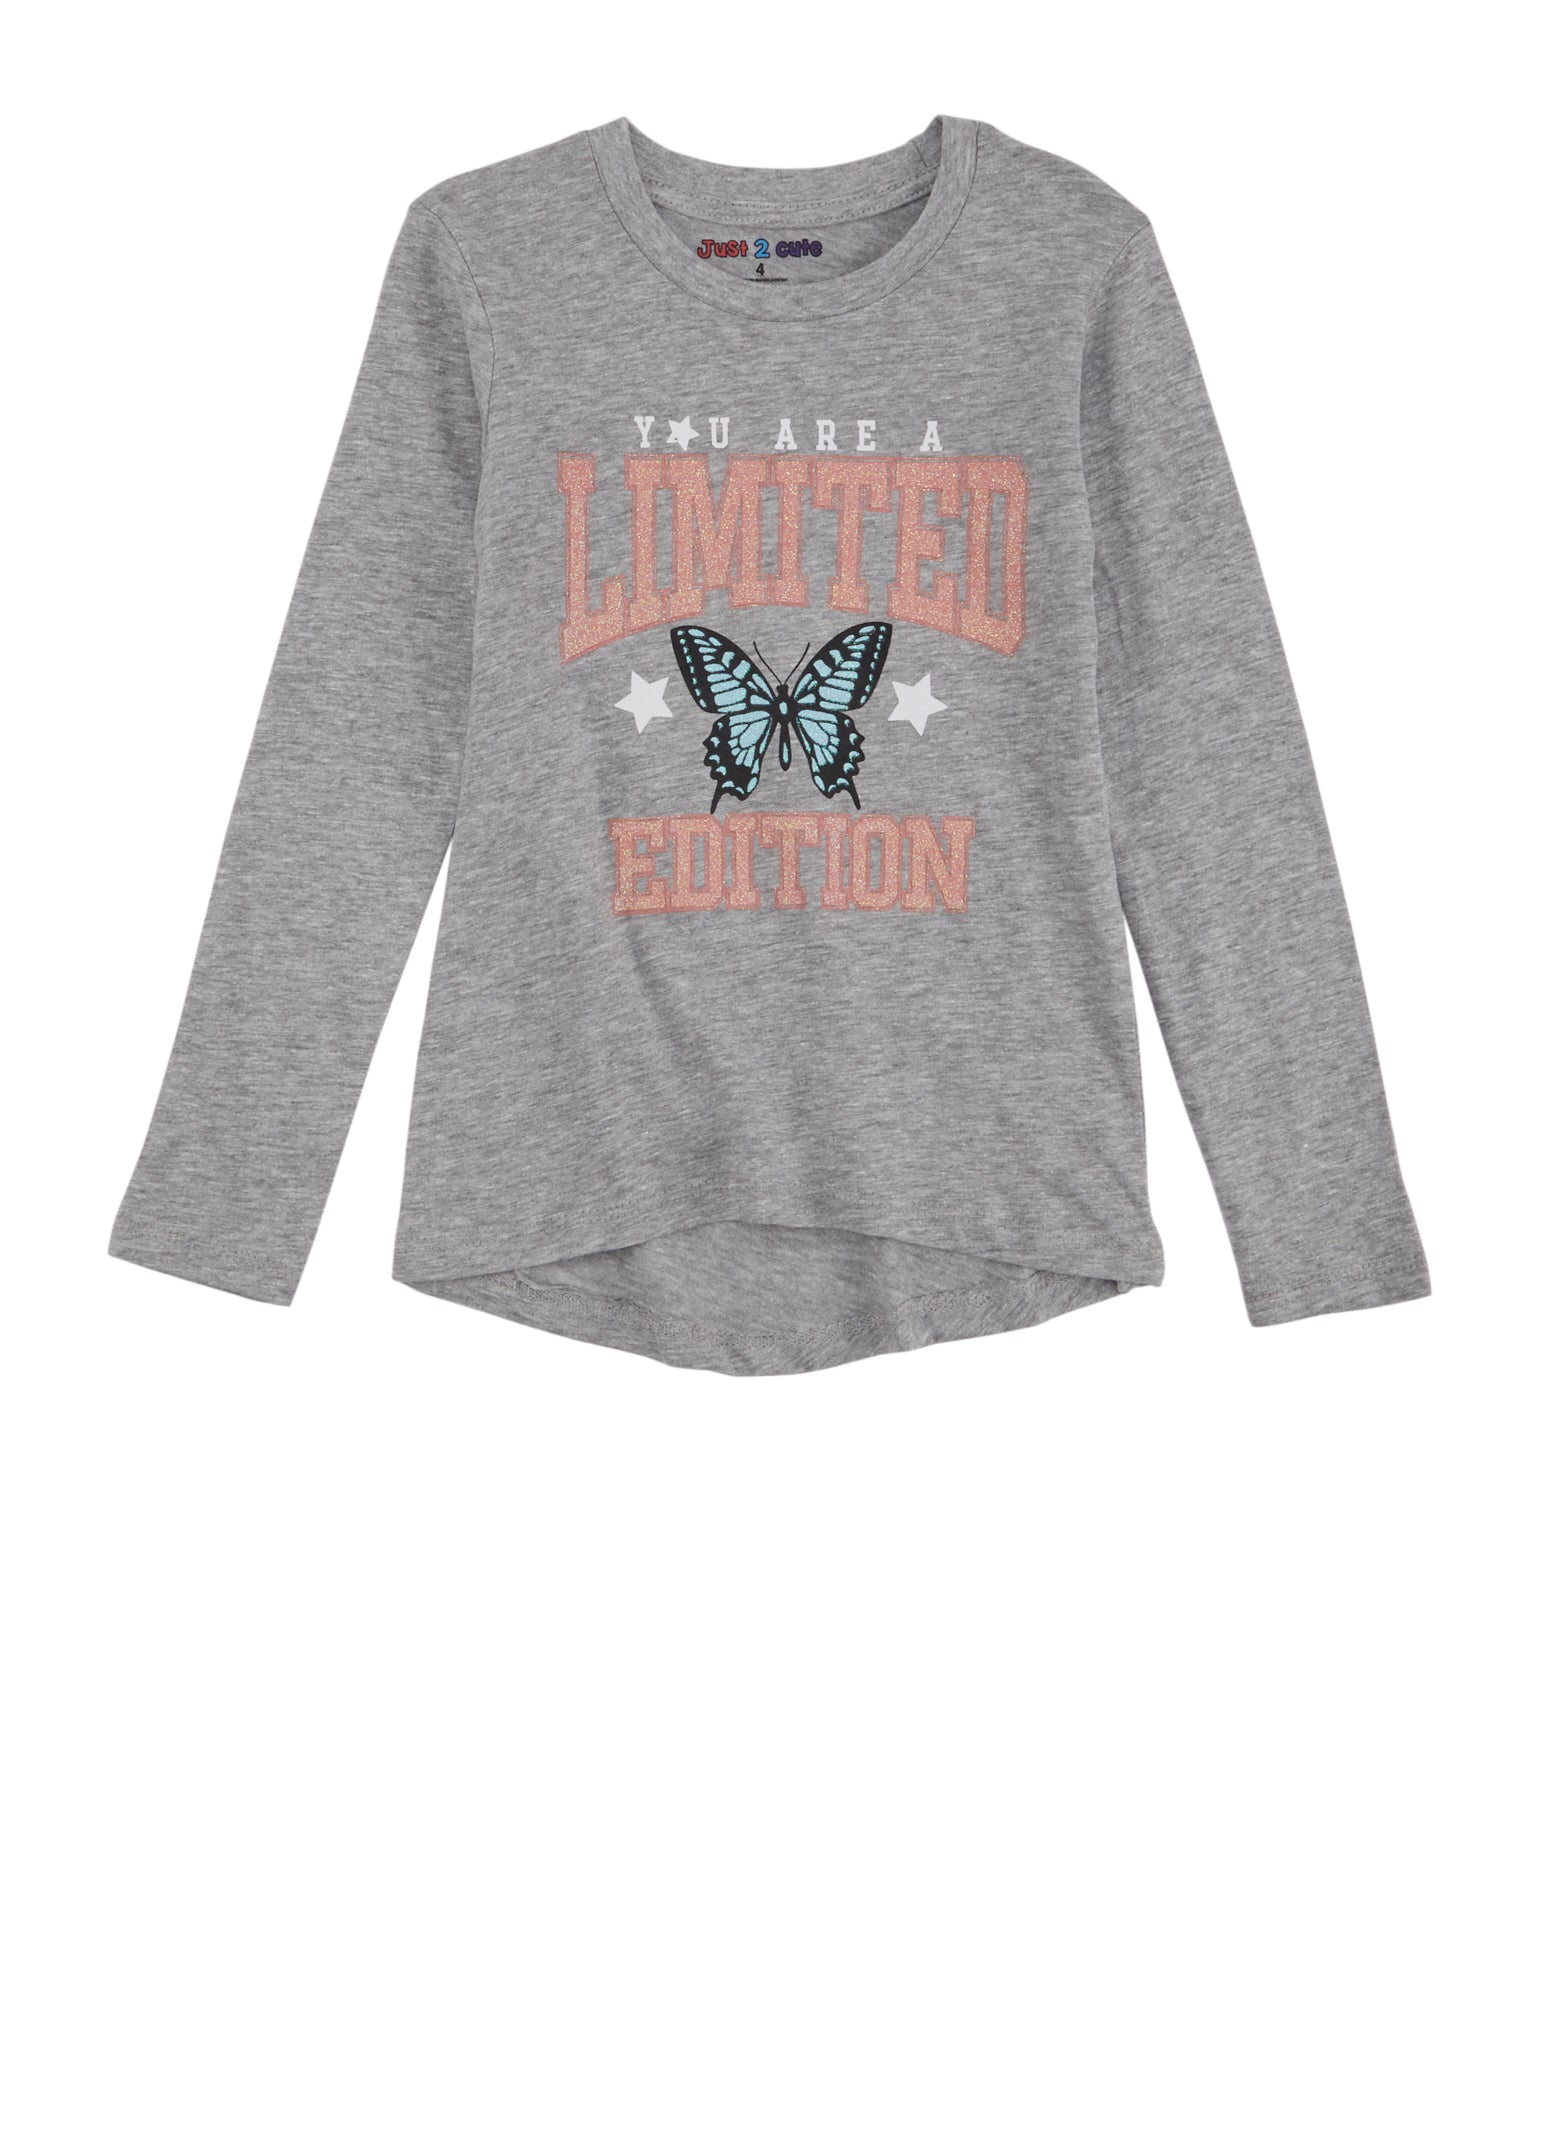 Little Girls Glitter Long Sleeve Limited Edition Graphic Tee, Grey, Size 5-6